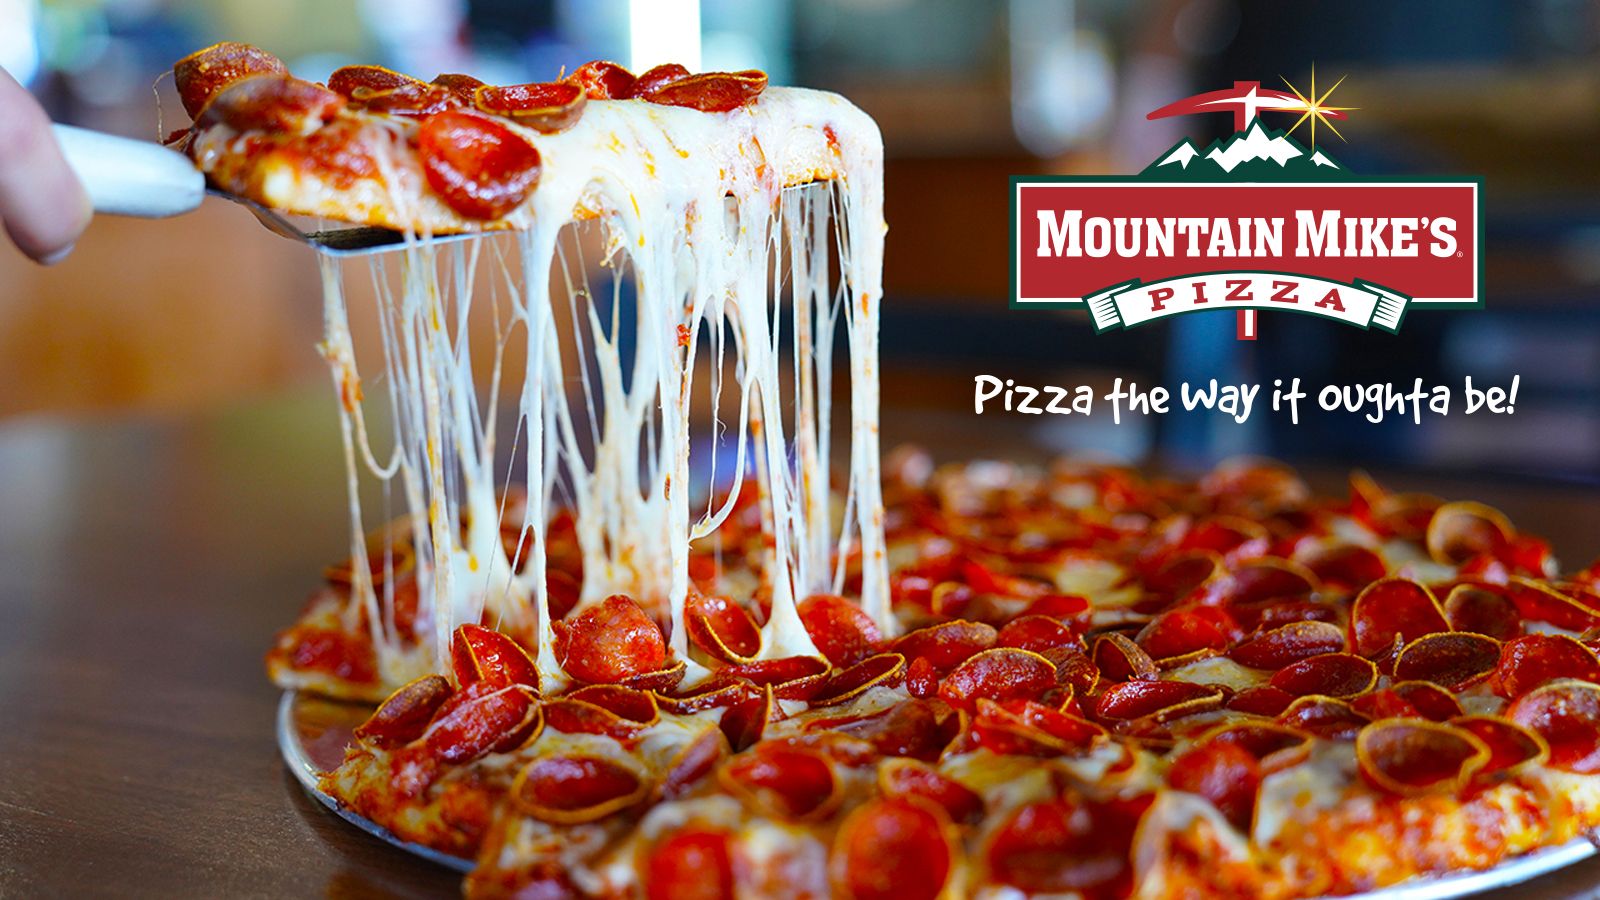 Mountain Mike's Pizza Enters Ninth State and Continues Growing National Footprint